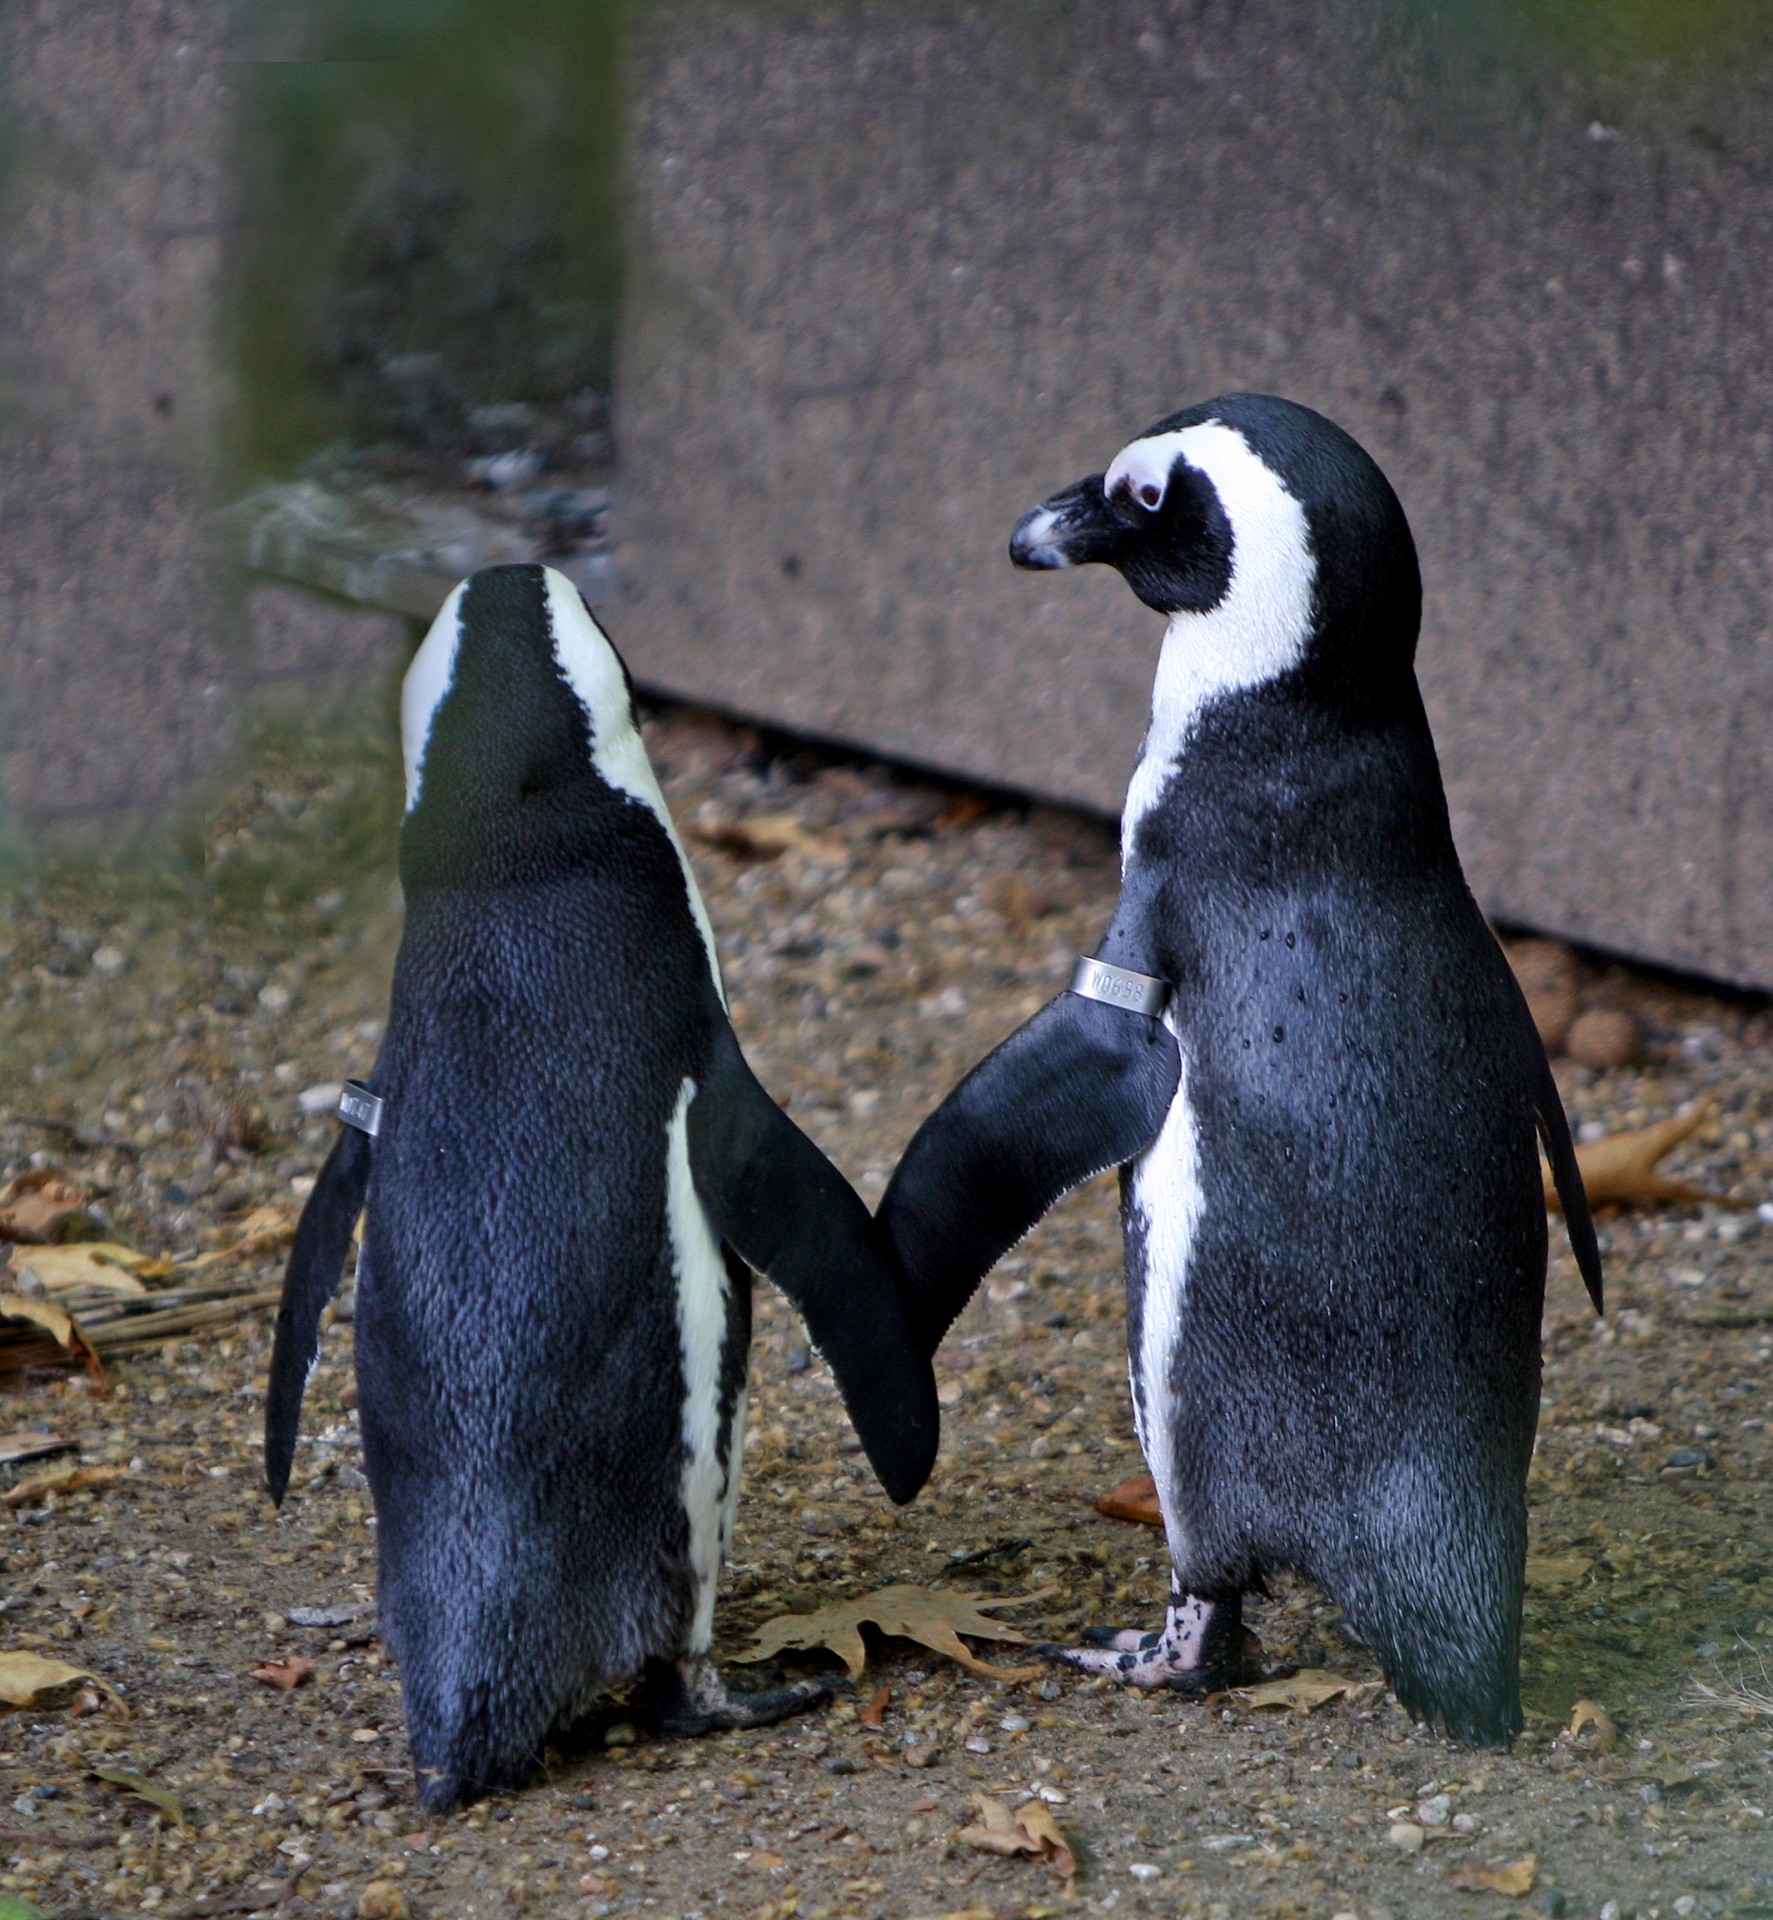 Albums 105+ Images pictures of penguins in love Excellent